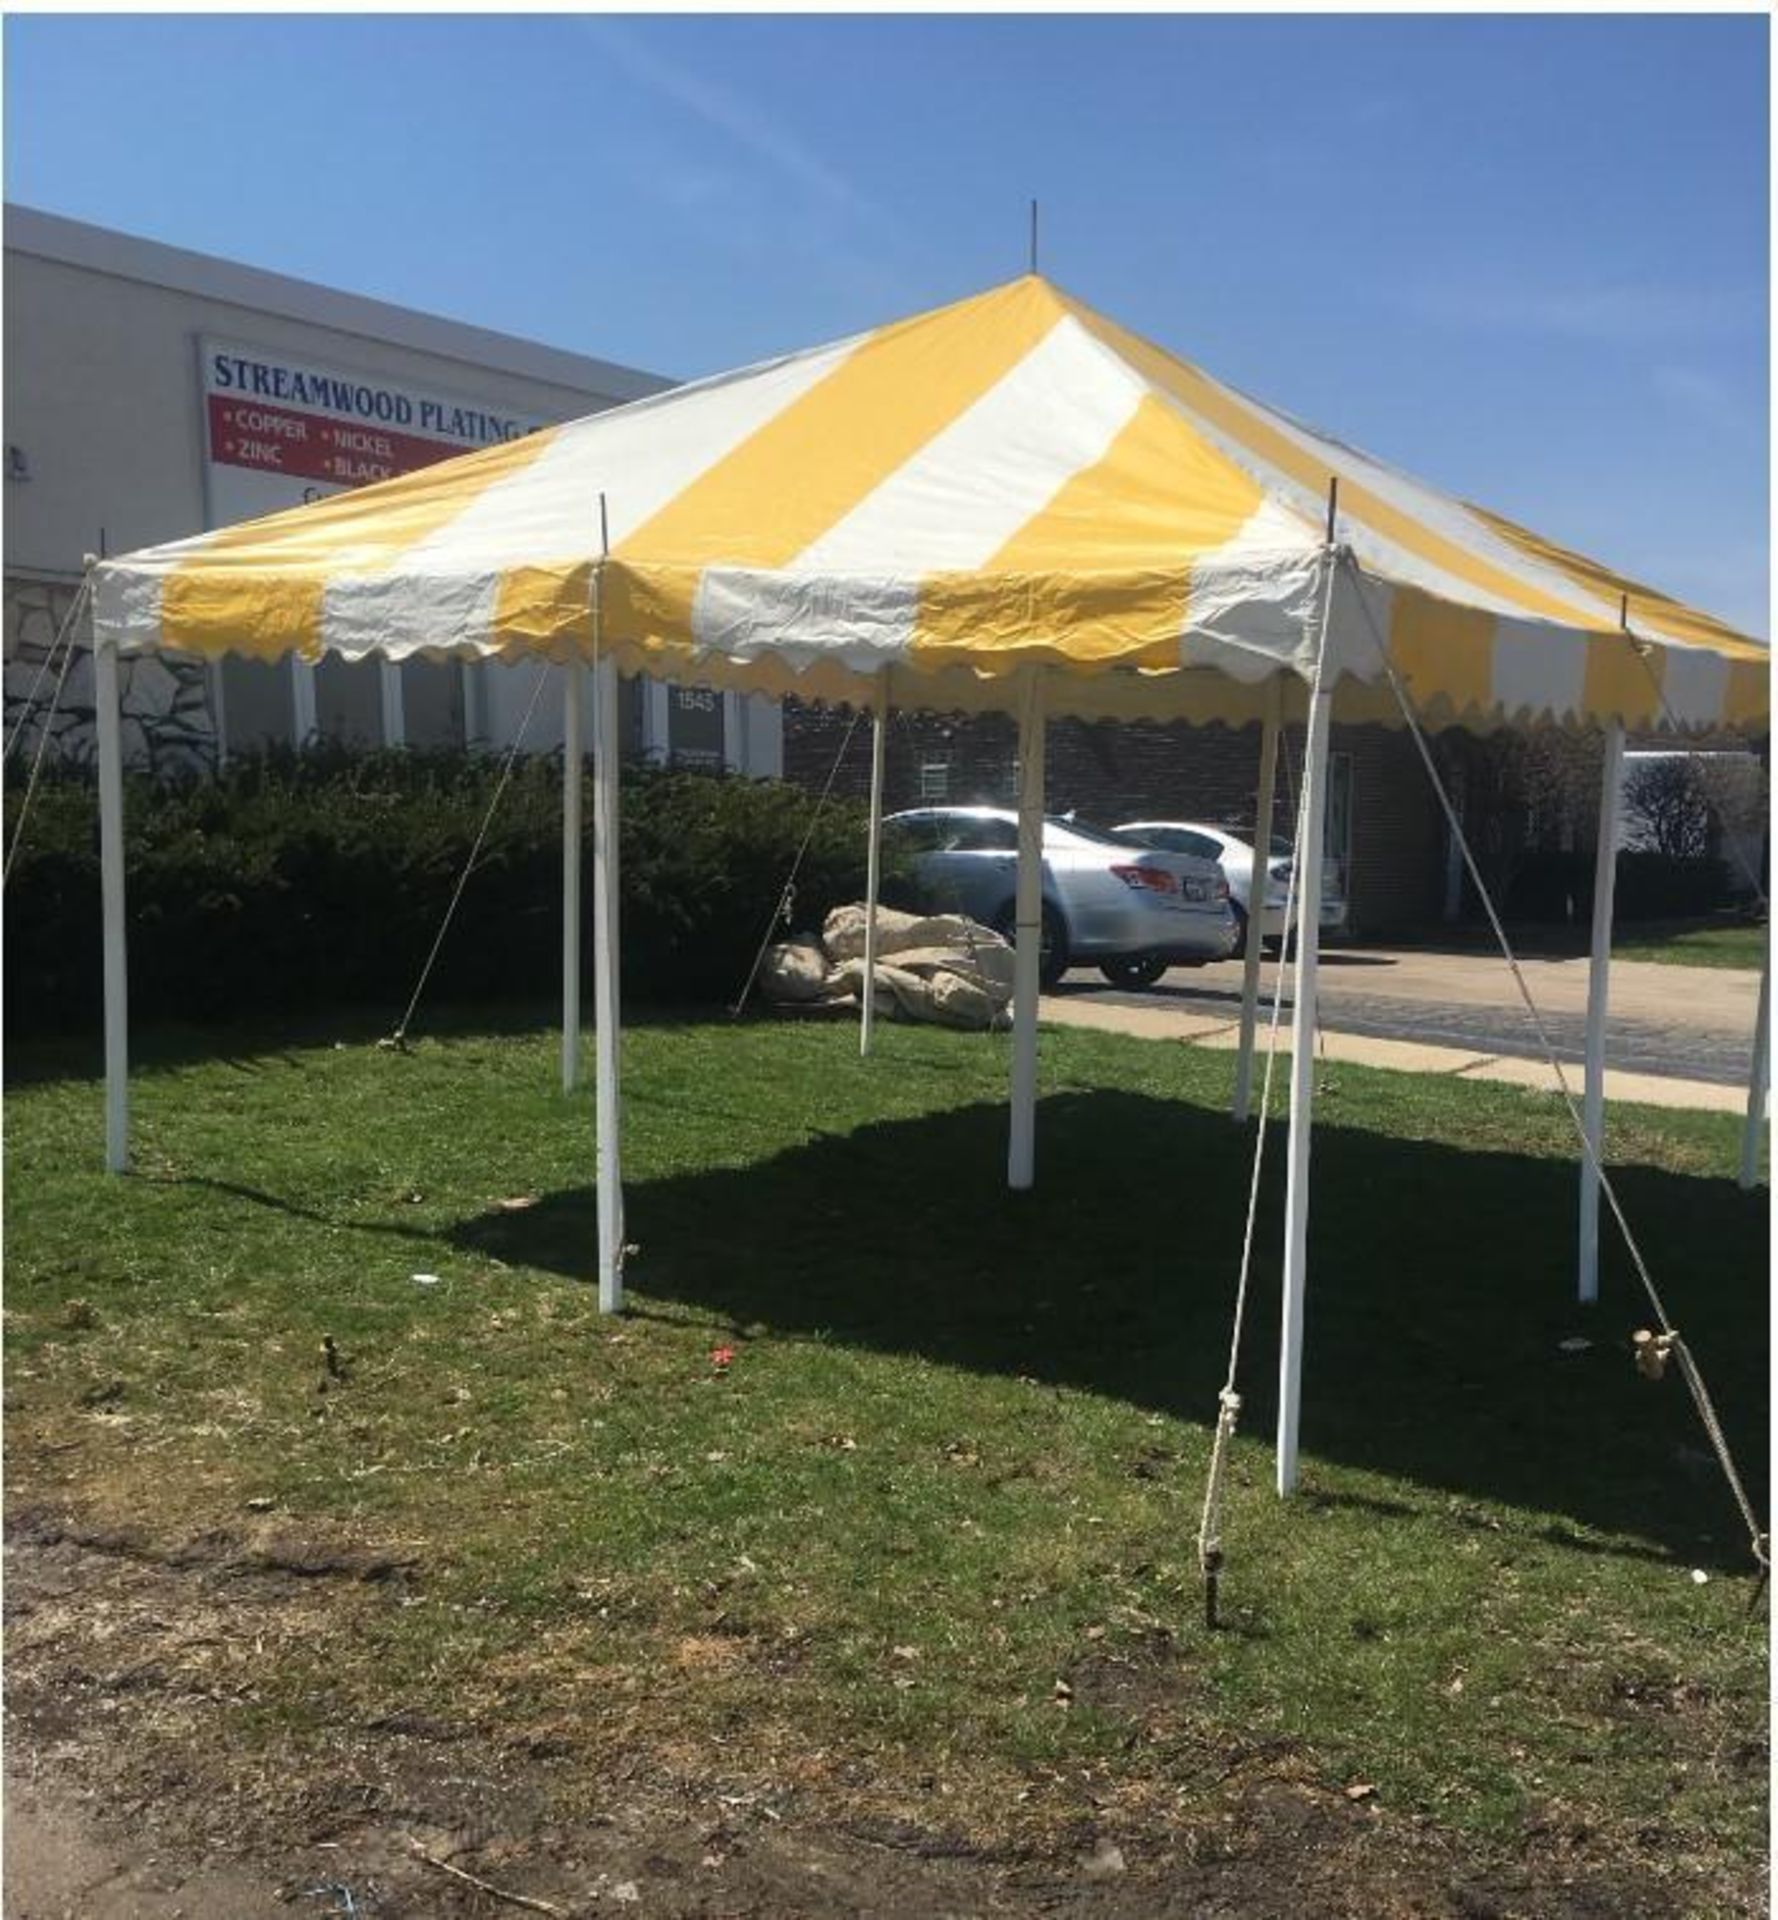 Eureka 15 ft. x 15 ft. Party Canopy, Yellow/White